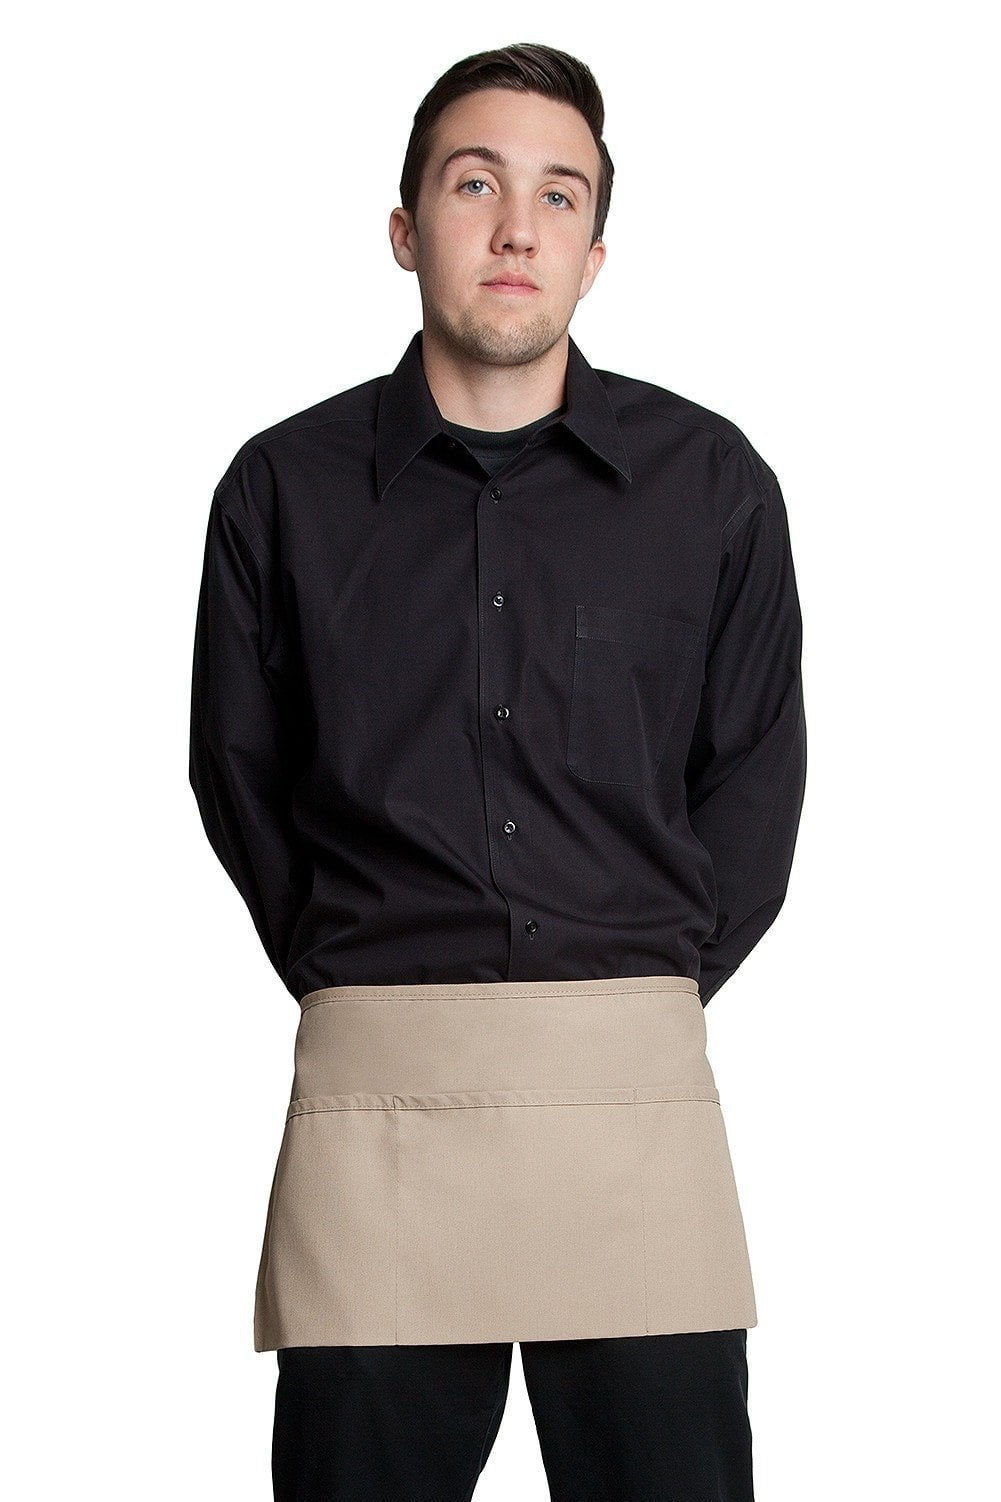 Men's chef Apron in black color – FaceOff Clothing